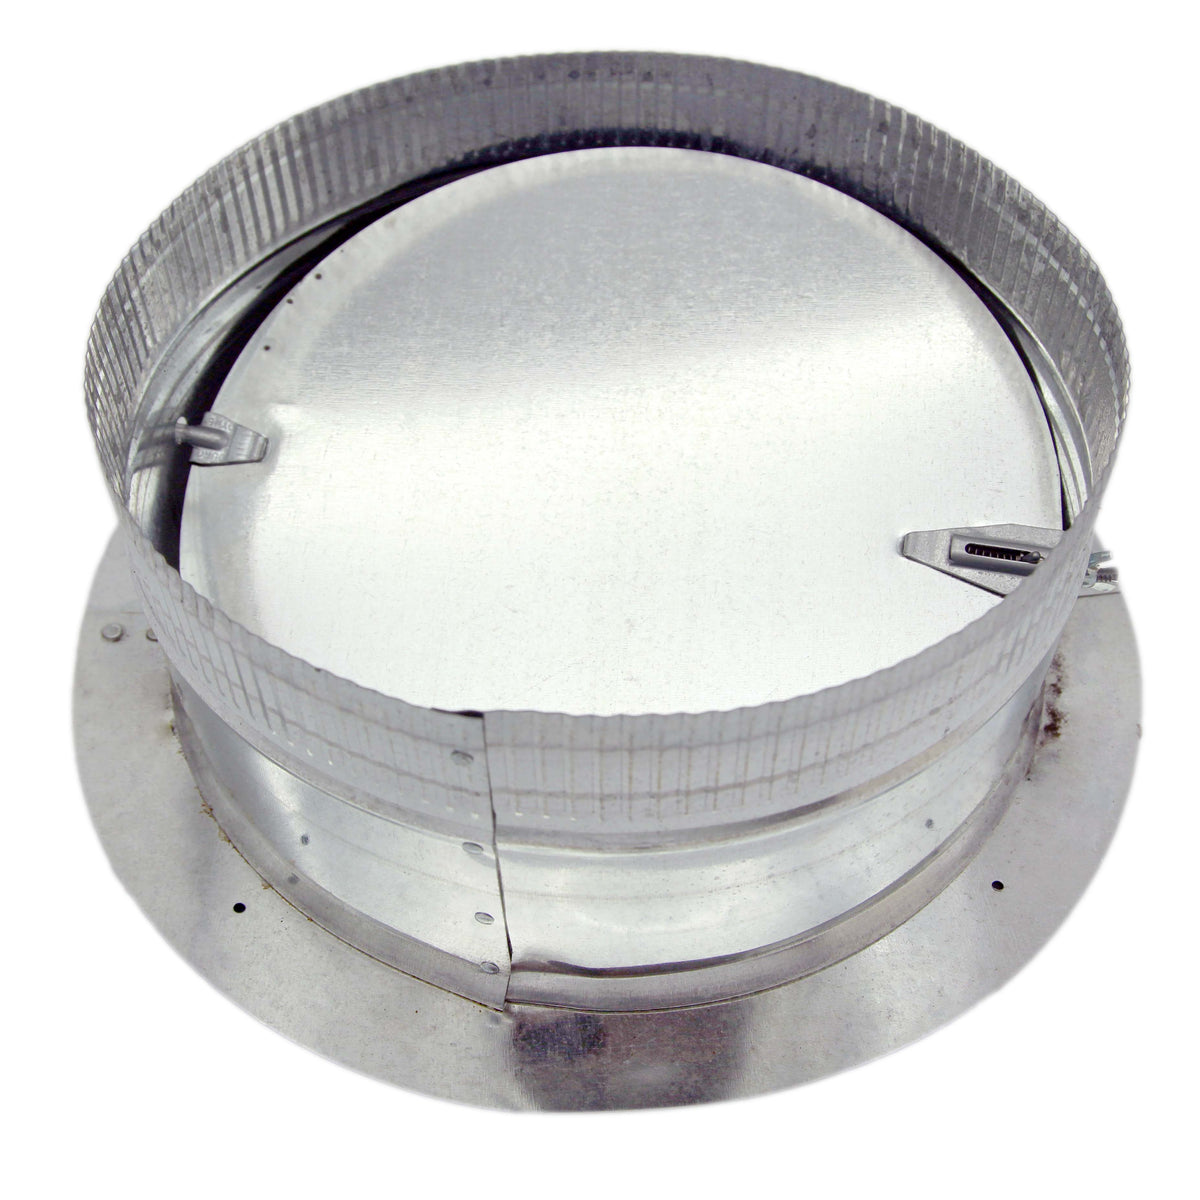 Stick-on Collar Duct with Damper | Galvanized Steel Metal Collar Duct with Damper 30 Gauge | 10&quot; Stick on Collar w/Damper is Compatible with Duct 10&quot;